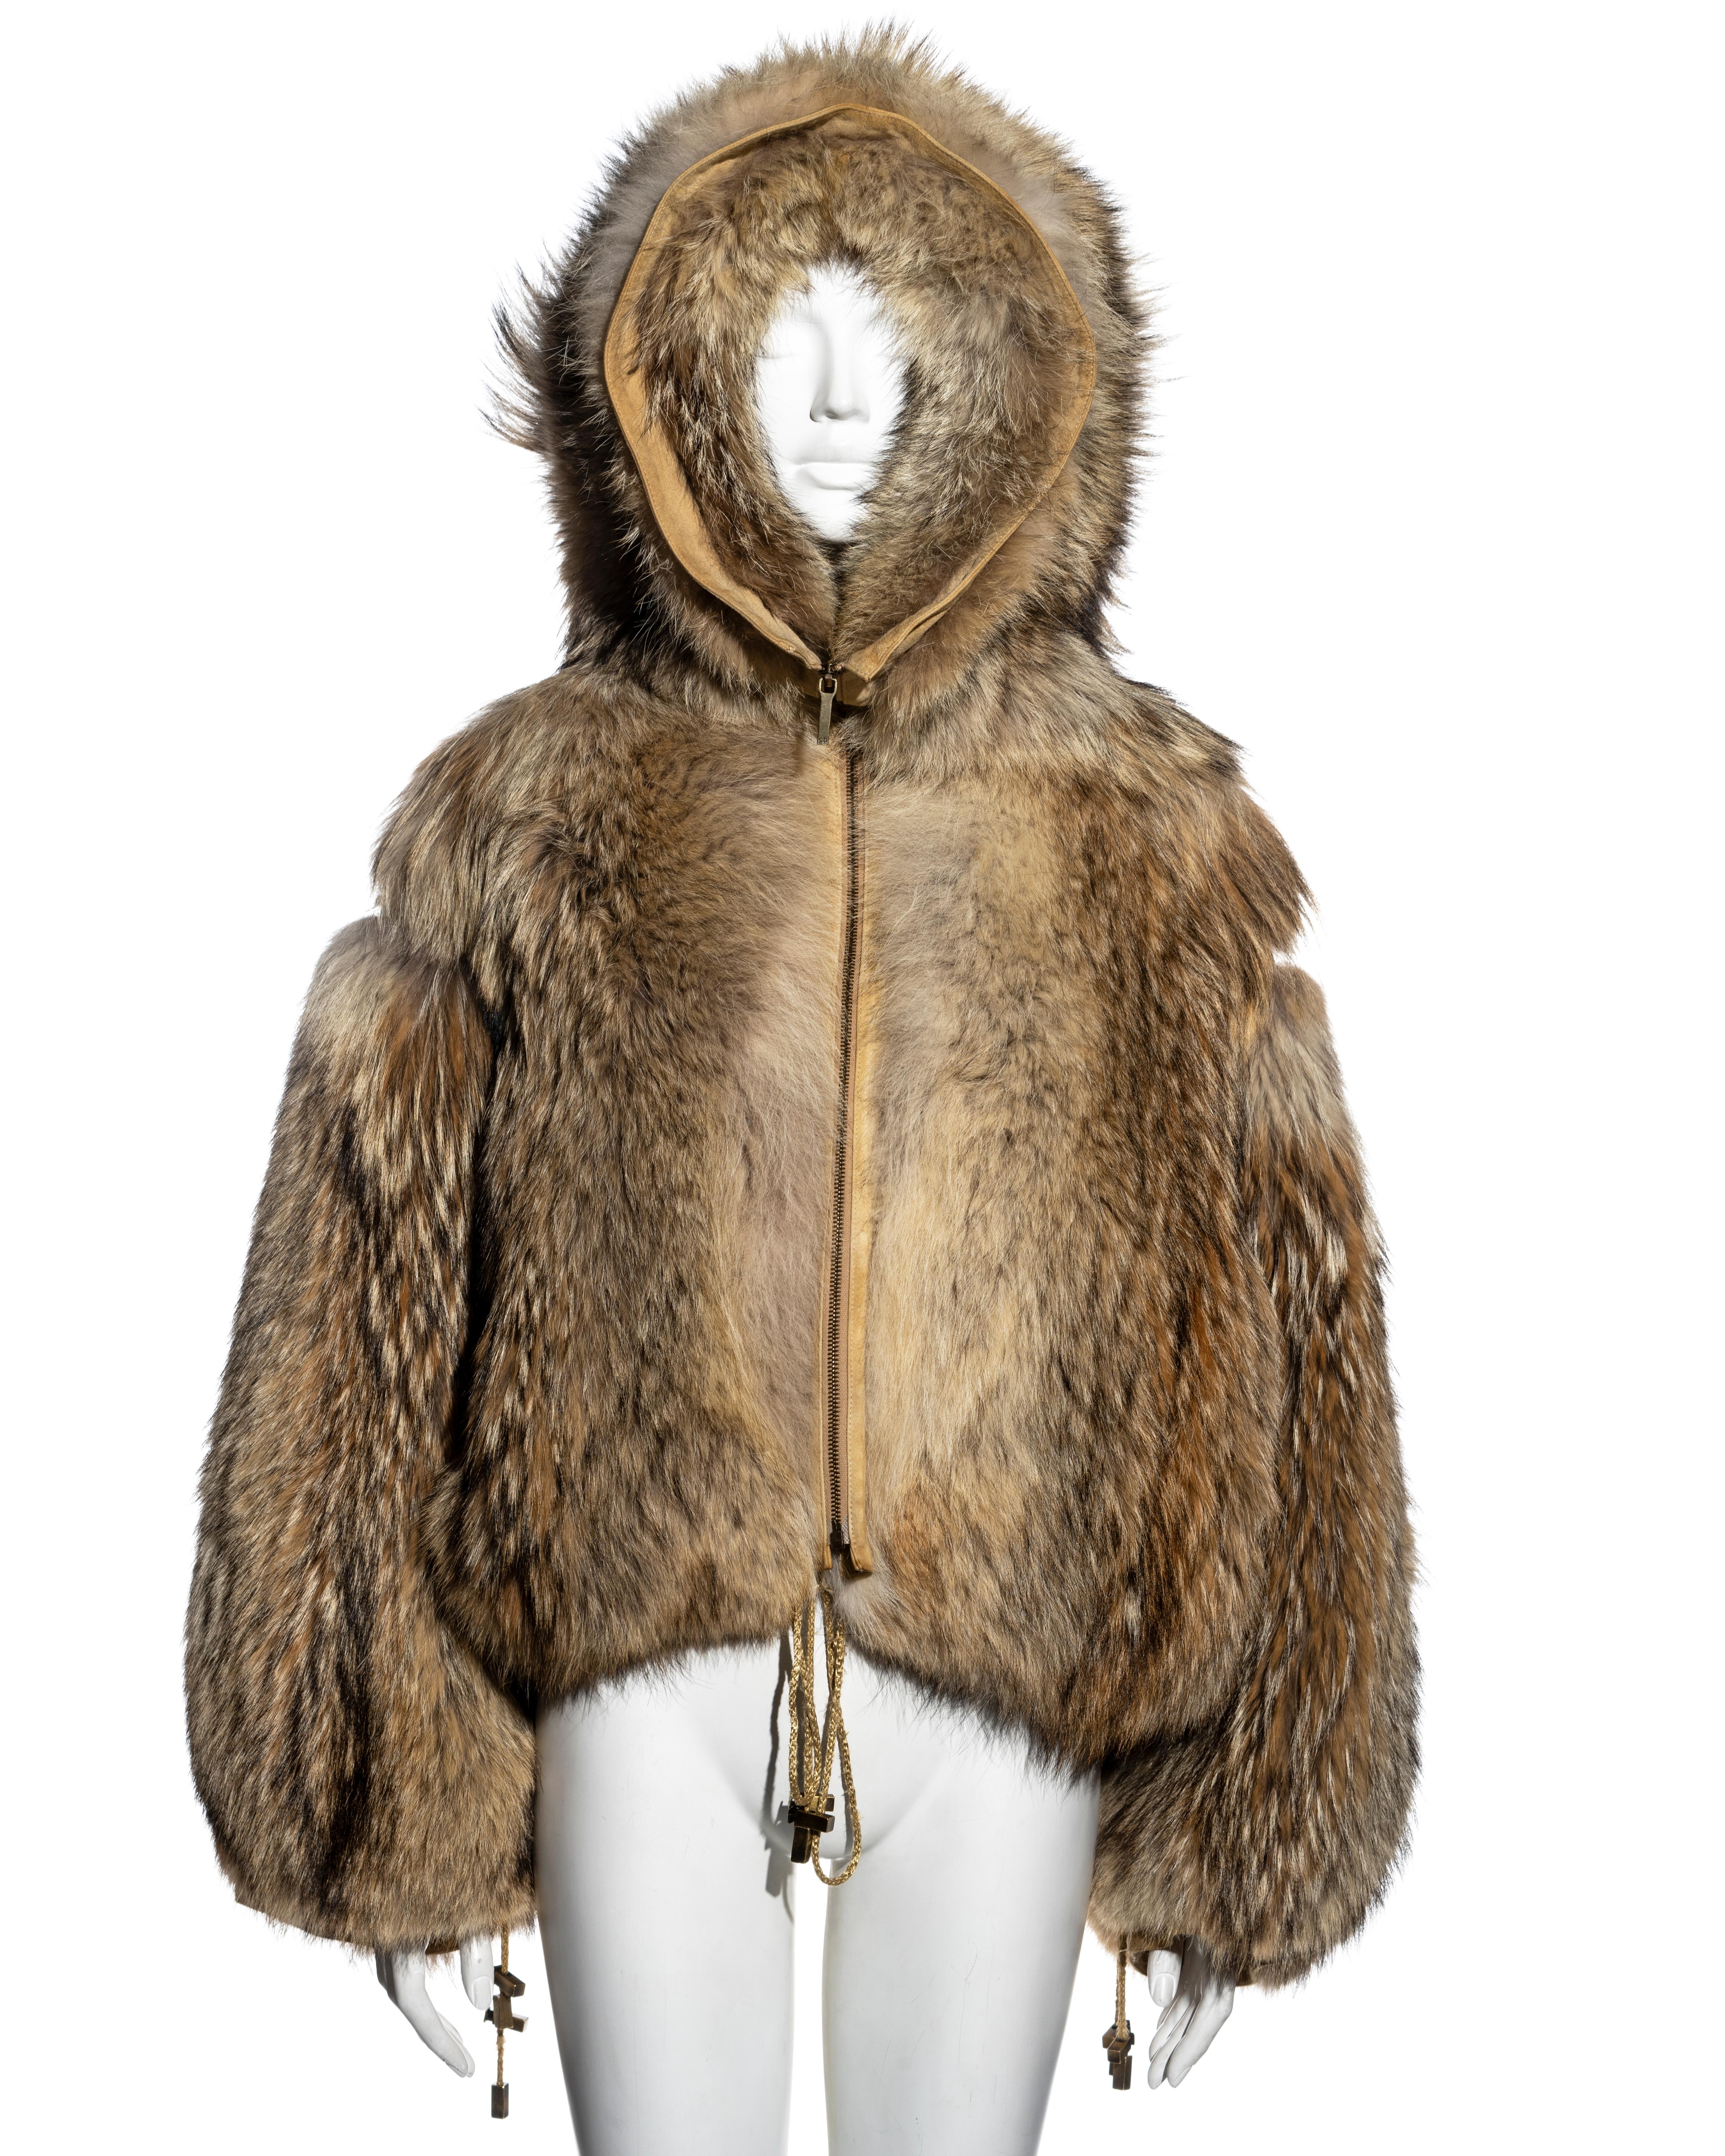 ▪ Christian Dior fur bomber jacket 
▪ Designed by John Galliano 
▪ Coyote fur
▪ Oversized fit
▪ Hood with fur lining 
▪ Drawstring ties at the waist and cuffs 
▪ Silk lining
▪ FR 38 - UK 10 - US 6
▪ 100% Coyote, 100% Silk
▪ Matching pants sold